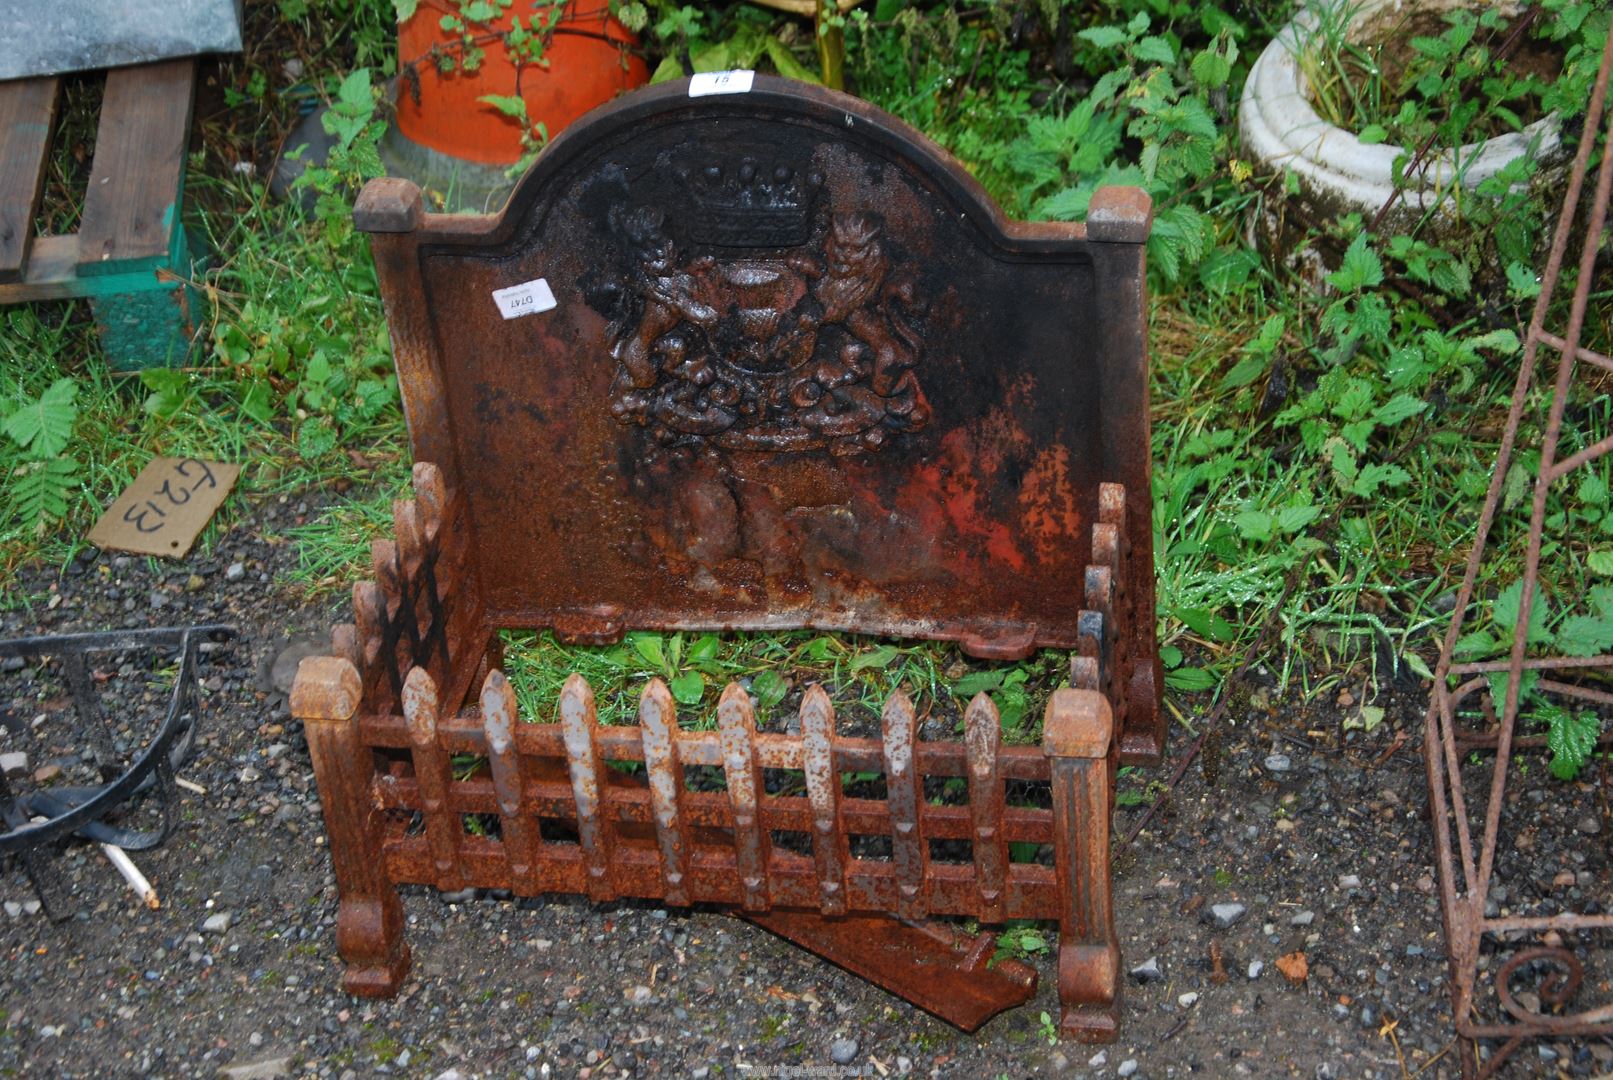 A Fire Dog Grate with coat of arms - 20" high x 20" across, (Grate 19½" x 11").